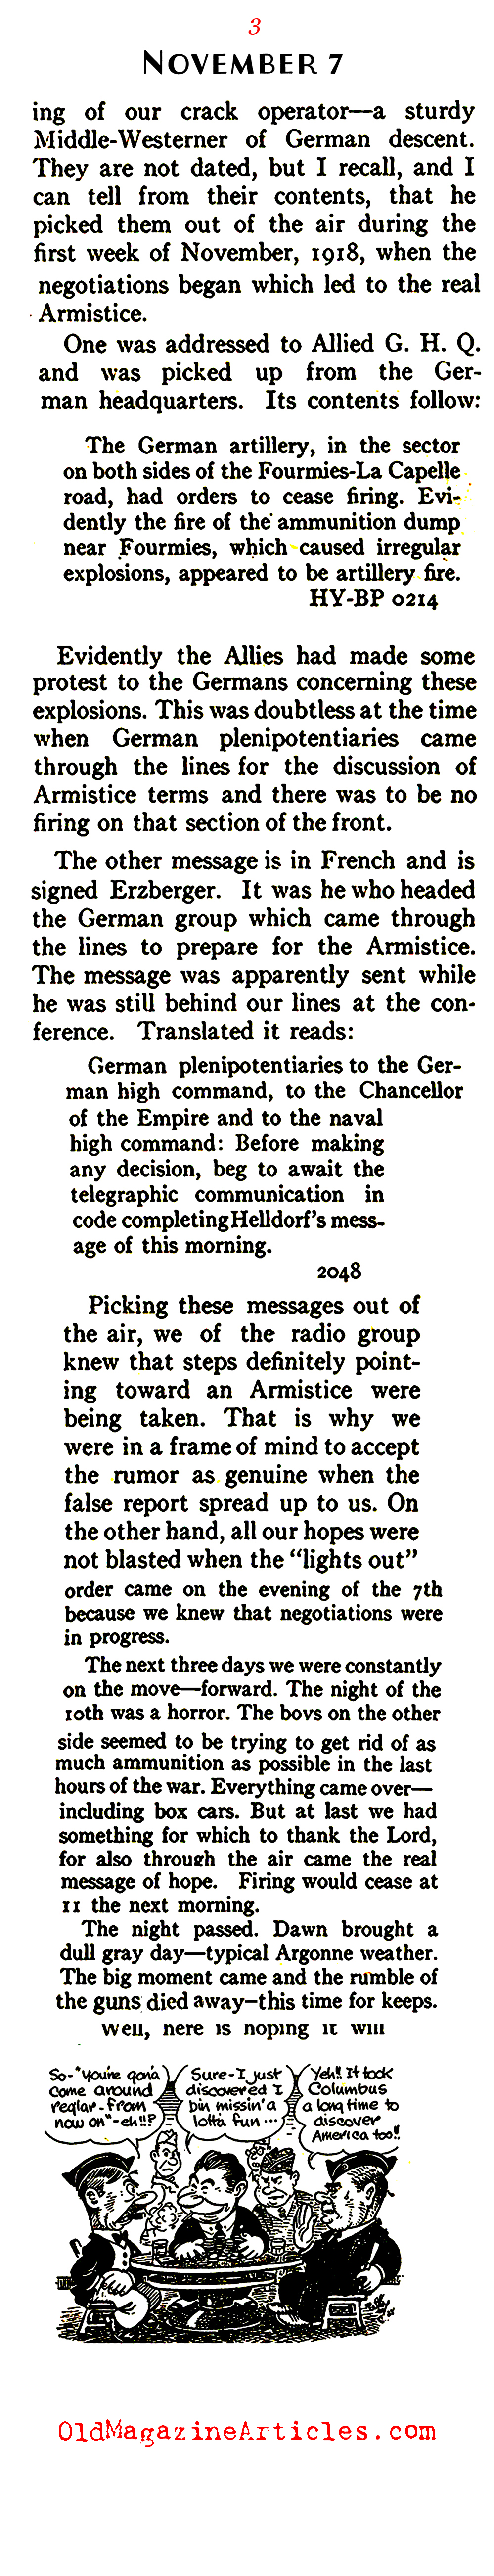 The German Peace Delegation Crosses the Lines (American Legion Monthly, 1938)